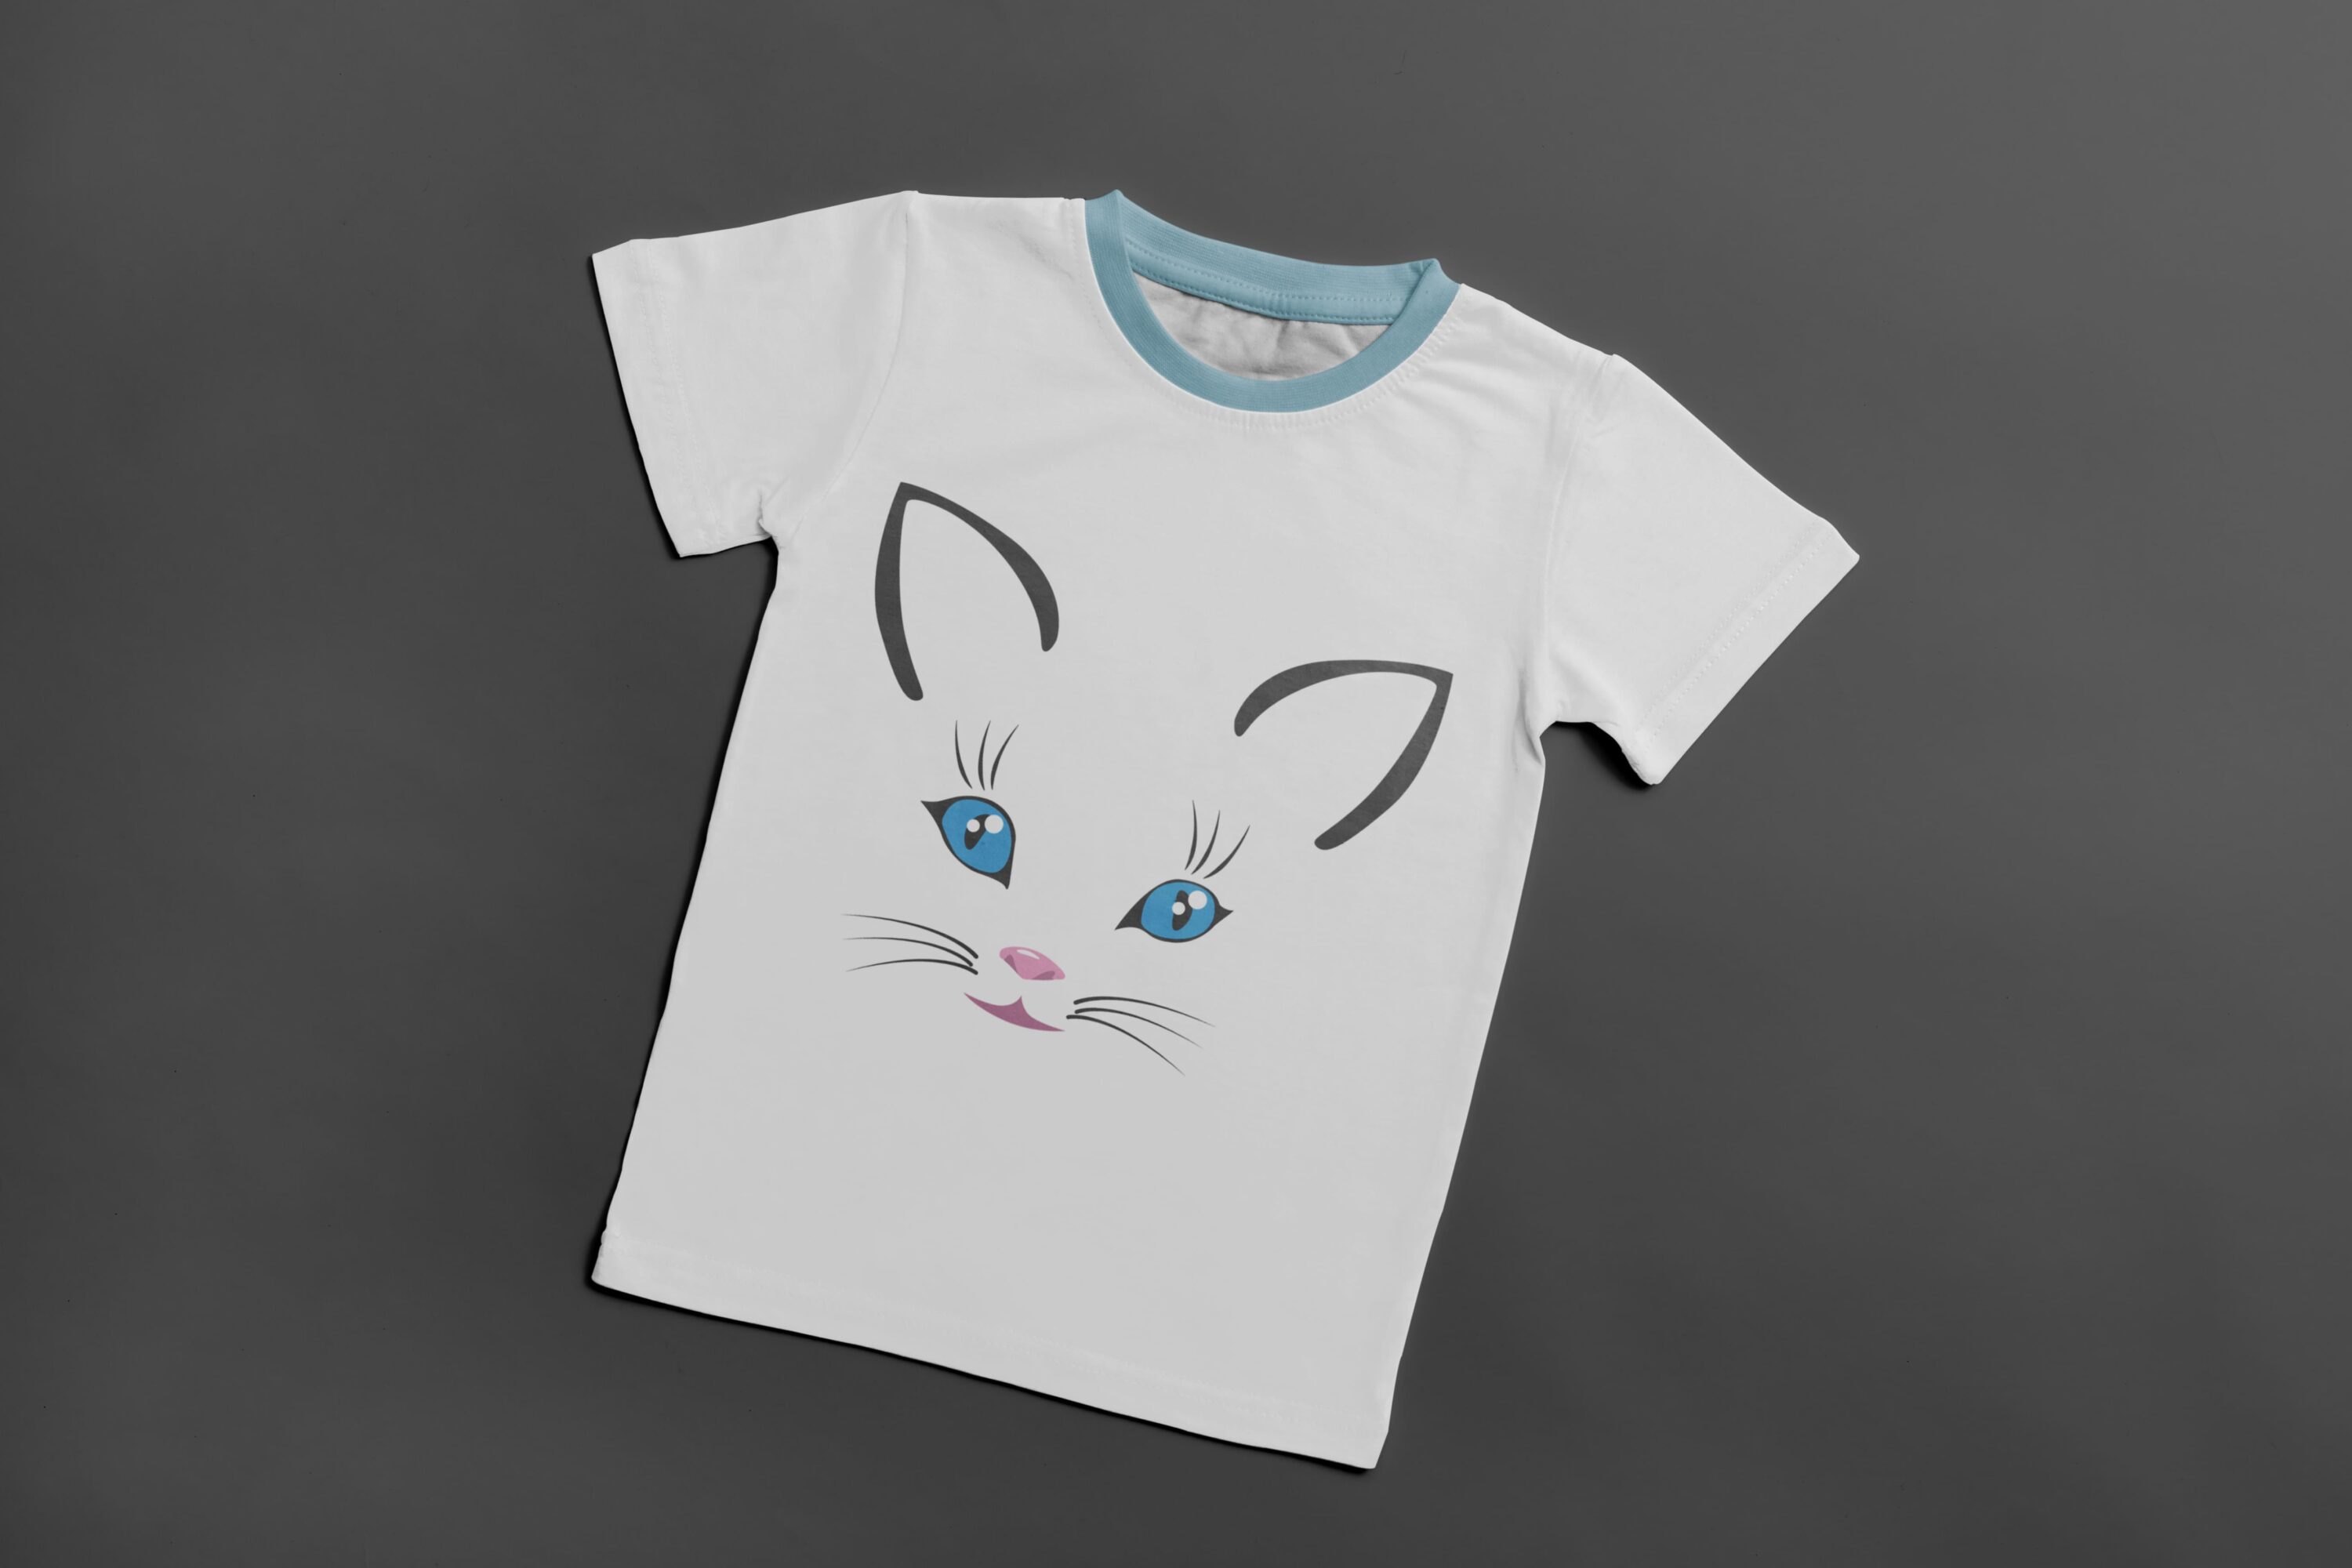 A white t-shirt with a light blue collar and the face of a cute cat with blue eyes.